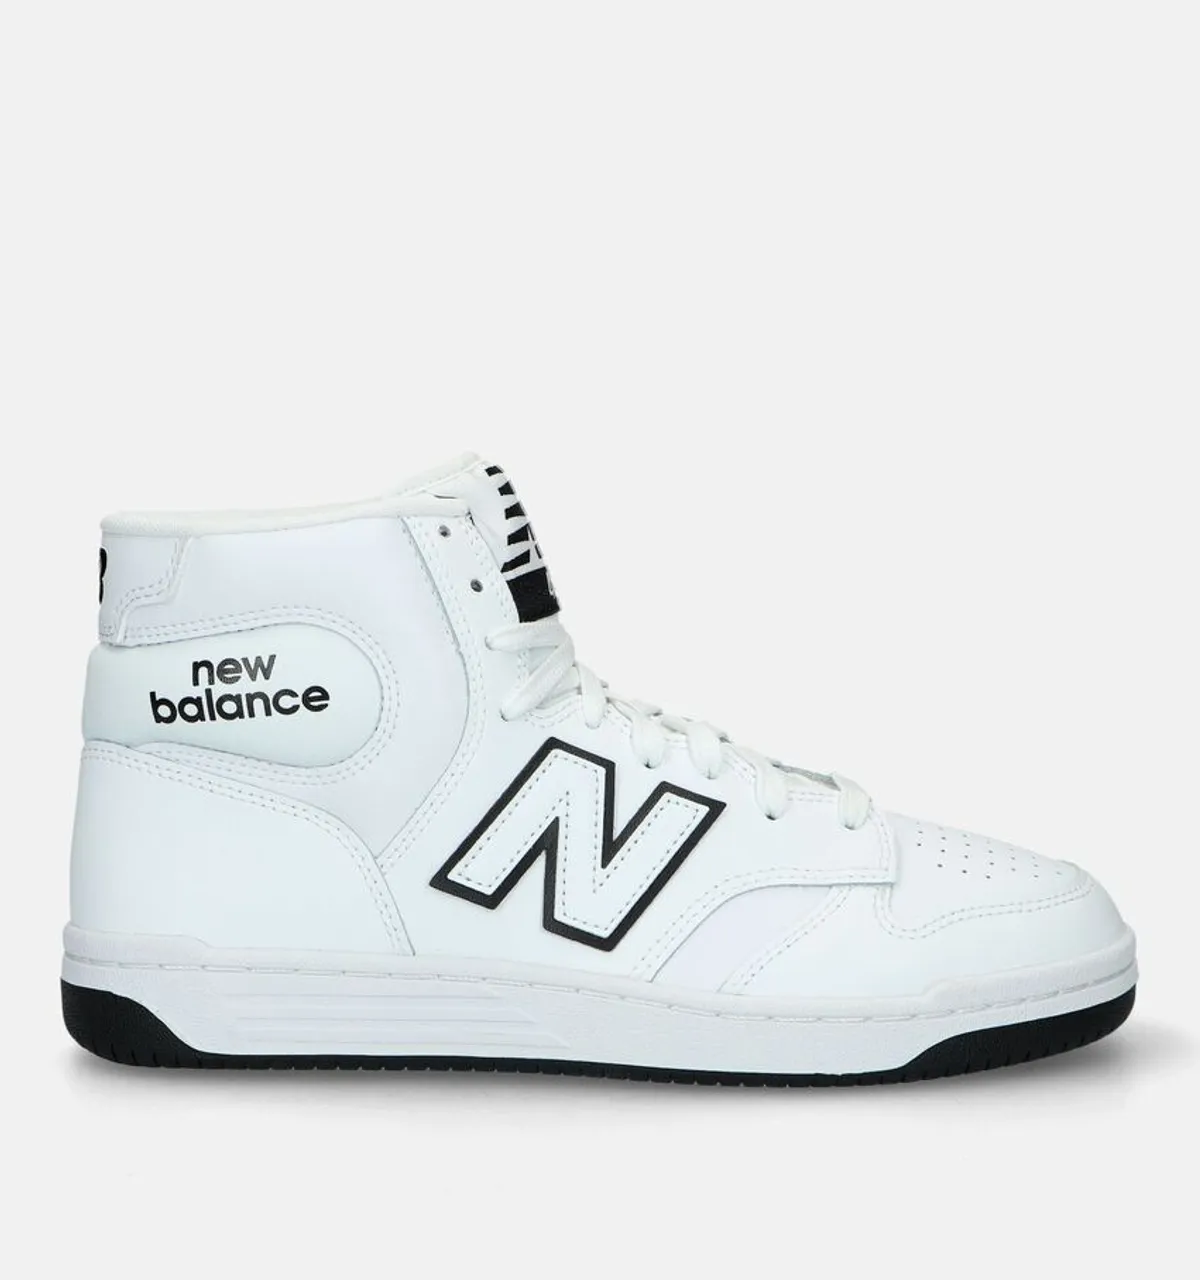 New Balance BB 480 Witte Hoge sneakers